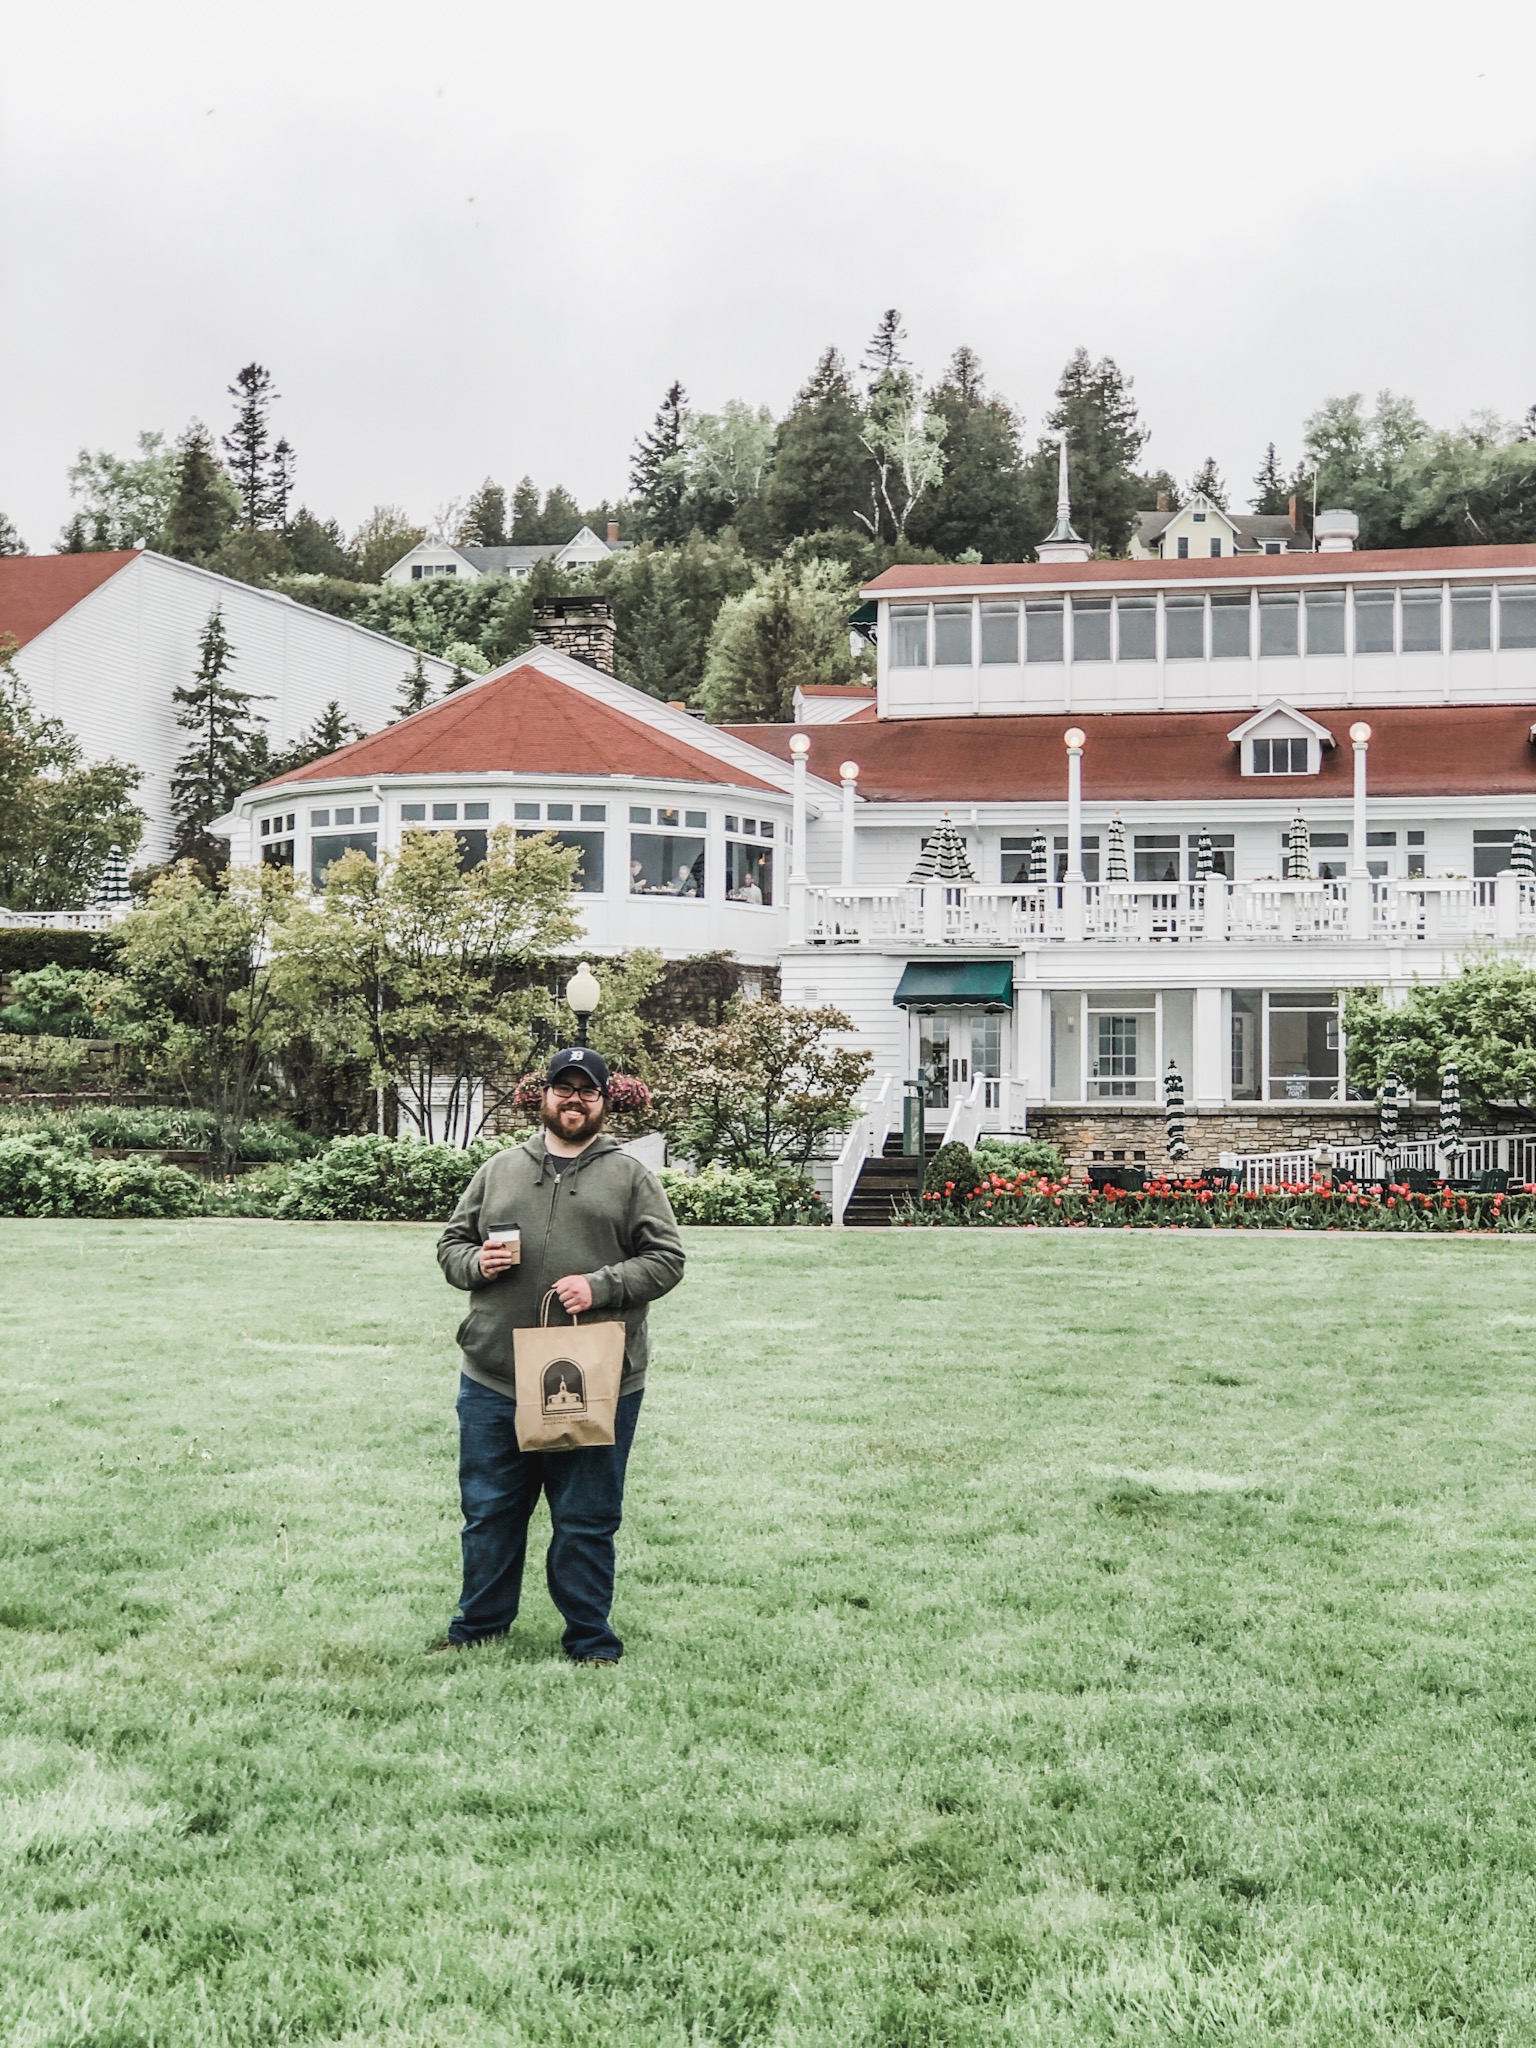 Where to stay, what to see, and where to go on Mackinac Island.  An honest review of our stay at Mission Point Resort on Mackinac Island in Northern Michigan.